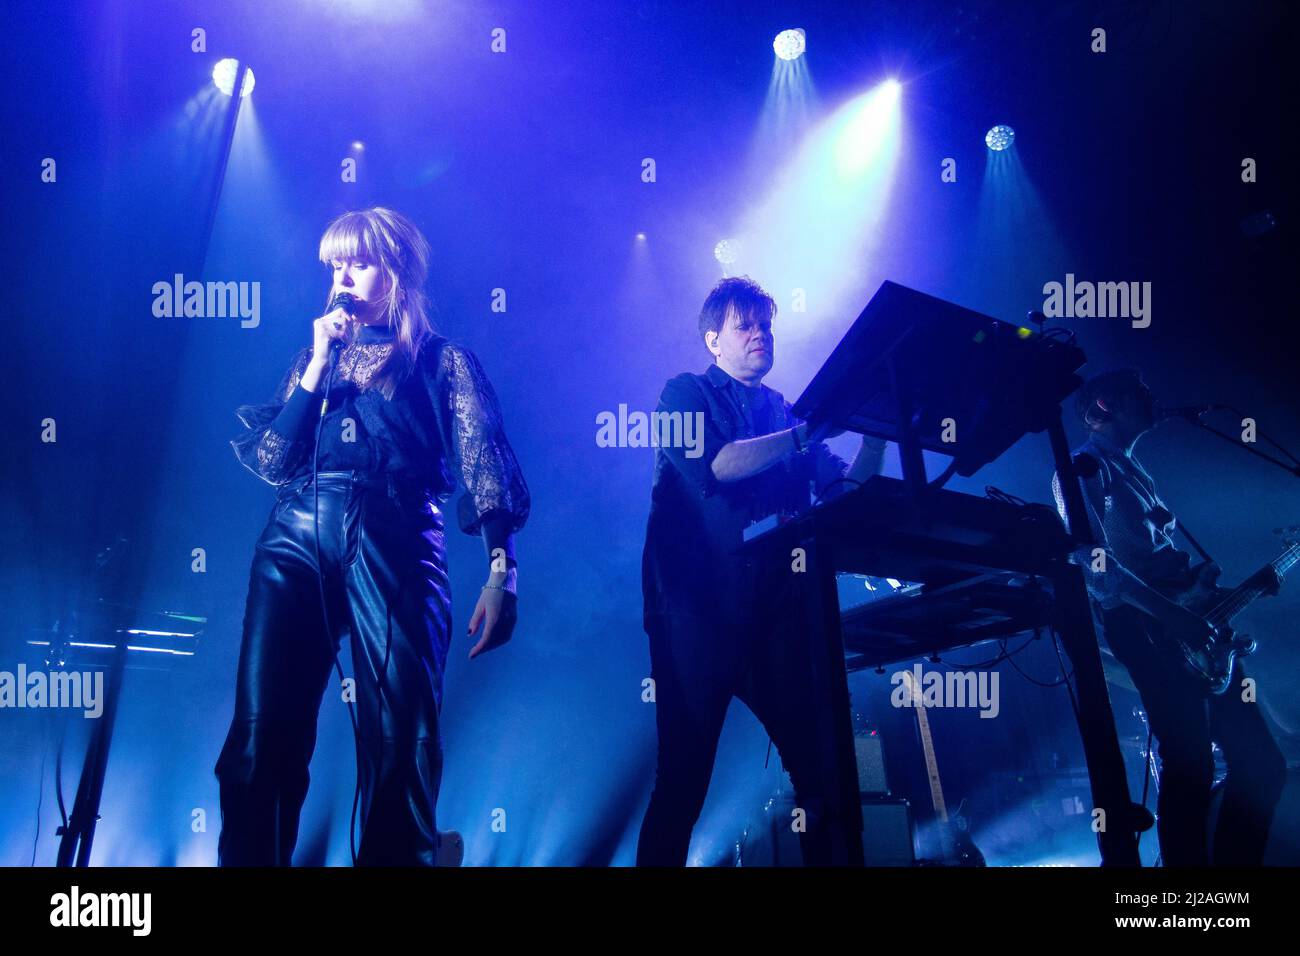 Oslo, Norway. 29th, March 2022. The Danish composer, music producer and electronic musician Trentemoller performs a live concert at Rockefeller in Oslo. Here Anders Trentemøller is seen live on stage with vocalist Disa. (Photo credit: Gonzales Photo - Per-Otto Oppi). Stock Photo